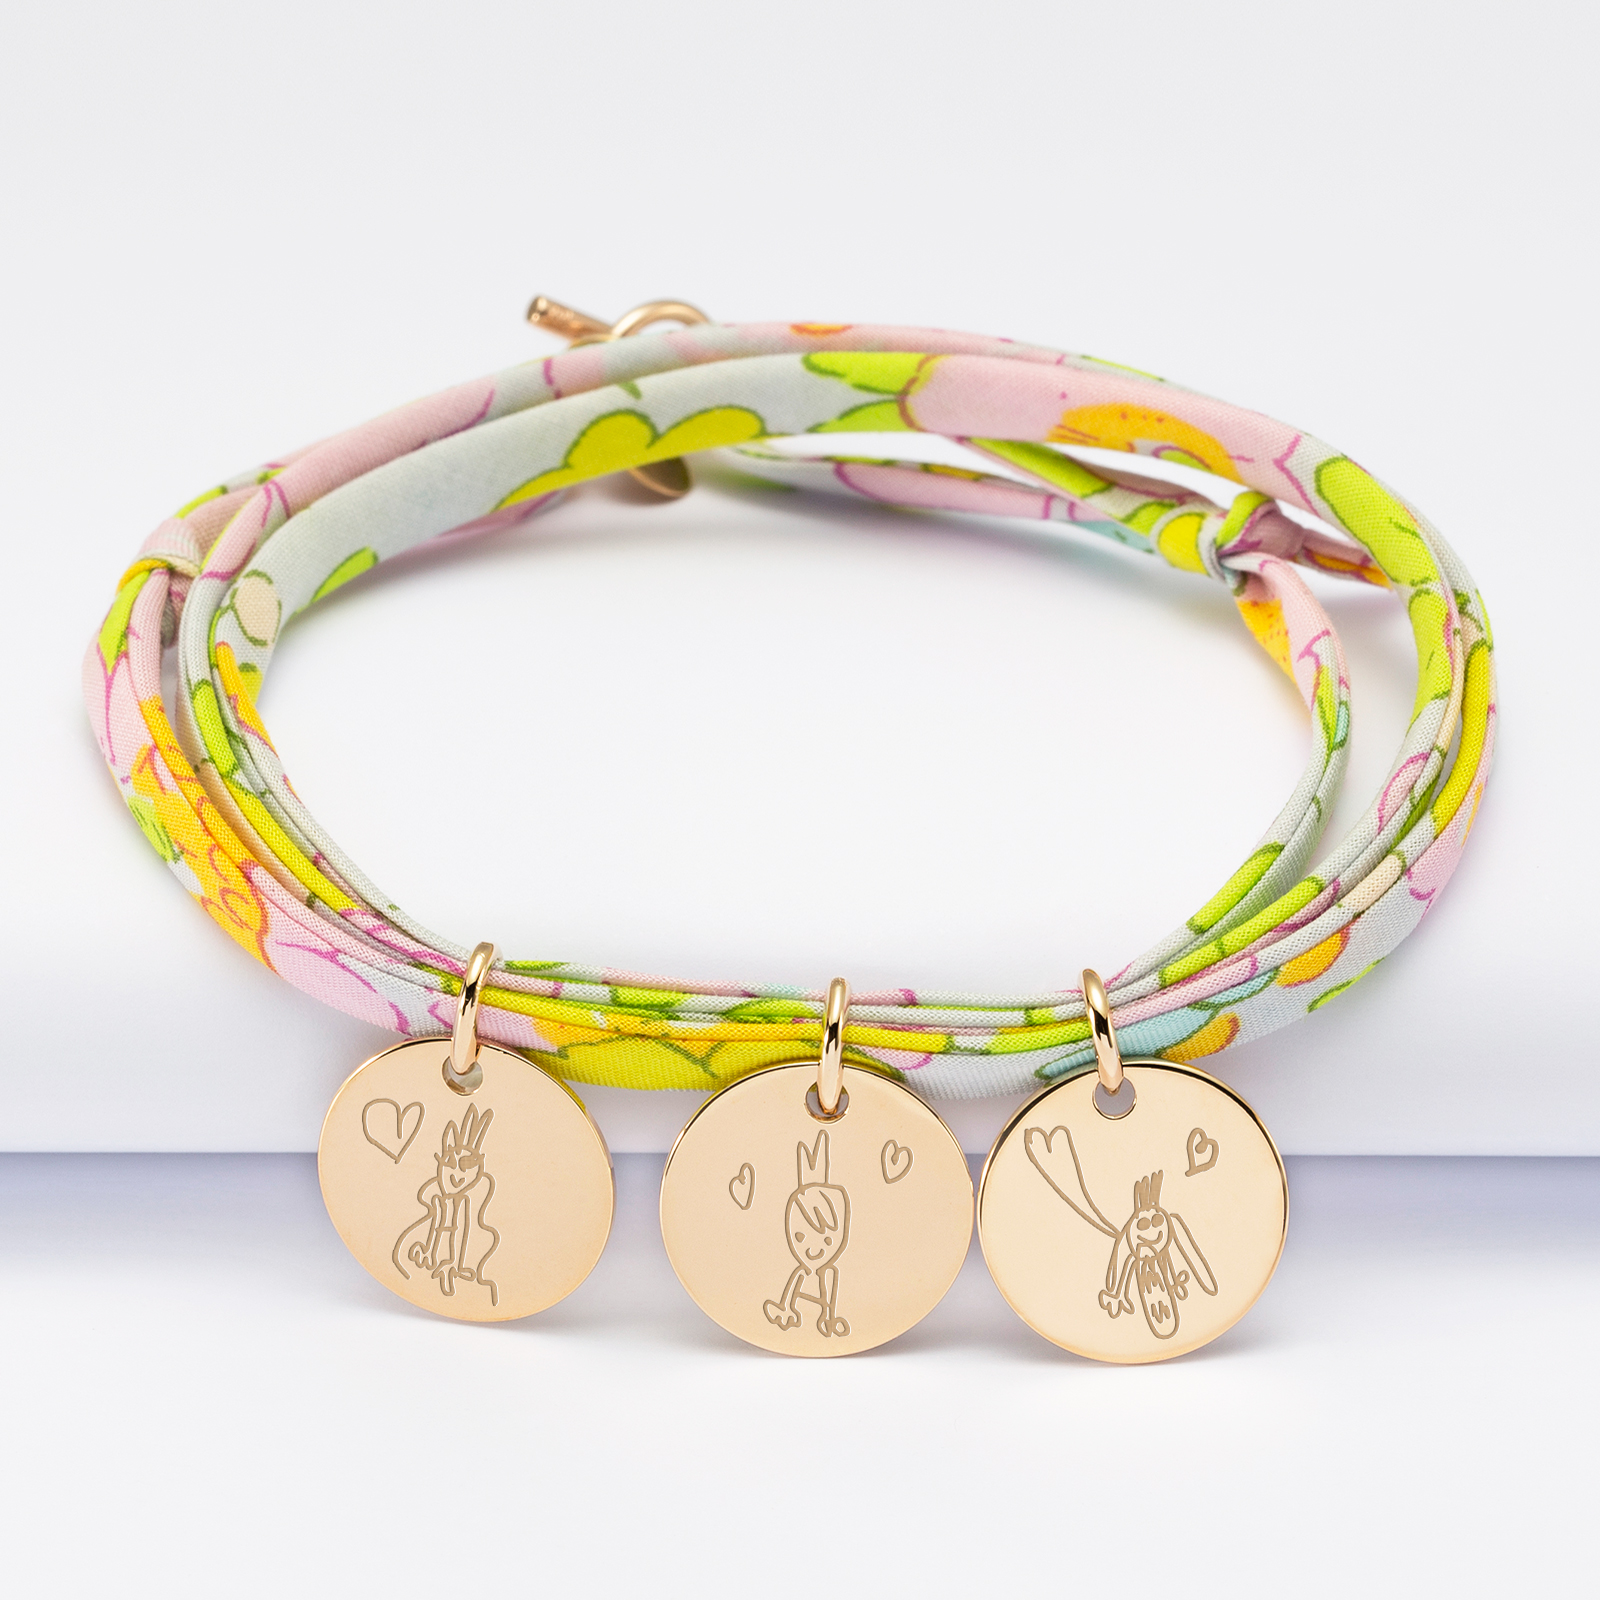 Liberty 3 turn bracelet with 3 personalised engraved gold plated medallions 15 mm - sketches